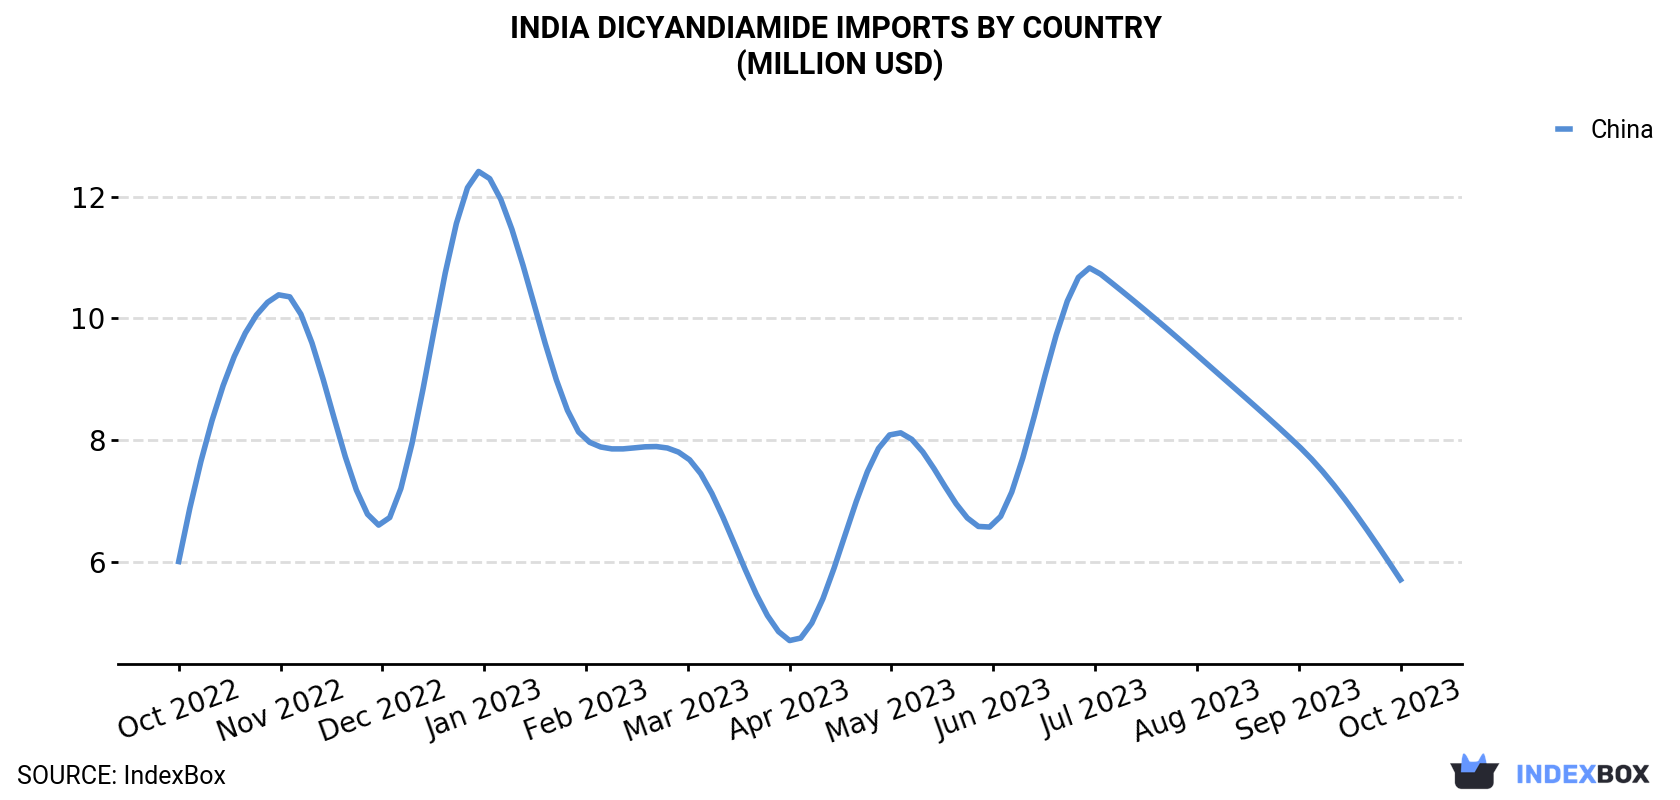 India Dicyandiamide Imports By Country (Million USD)